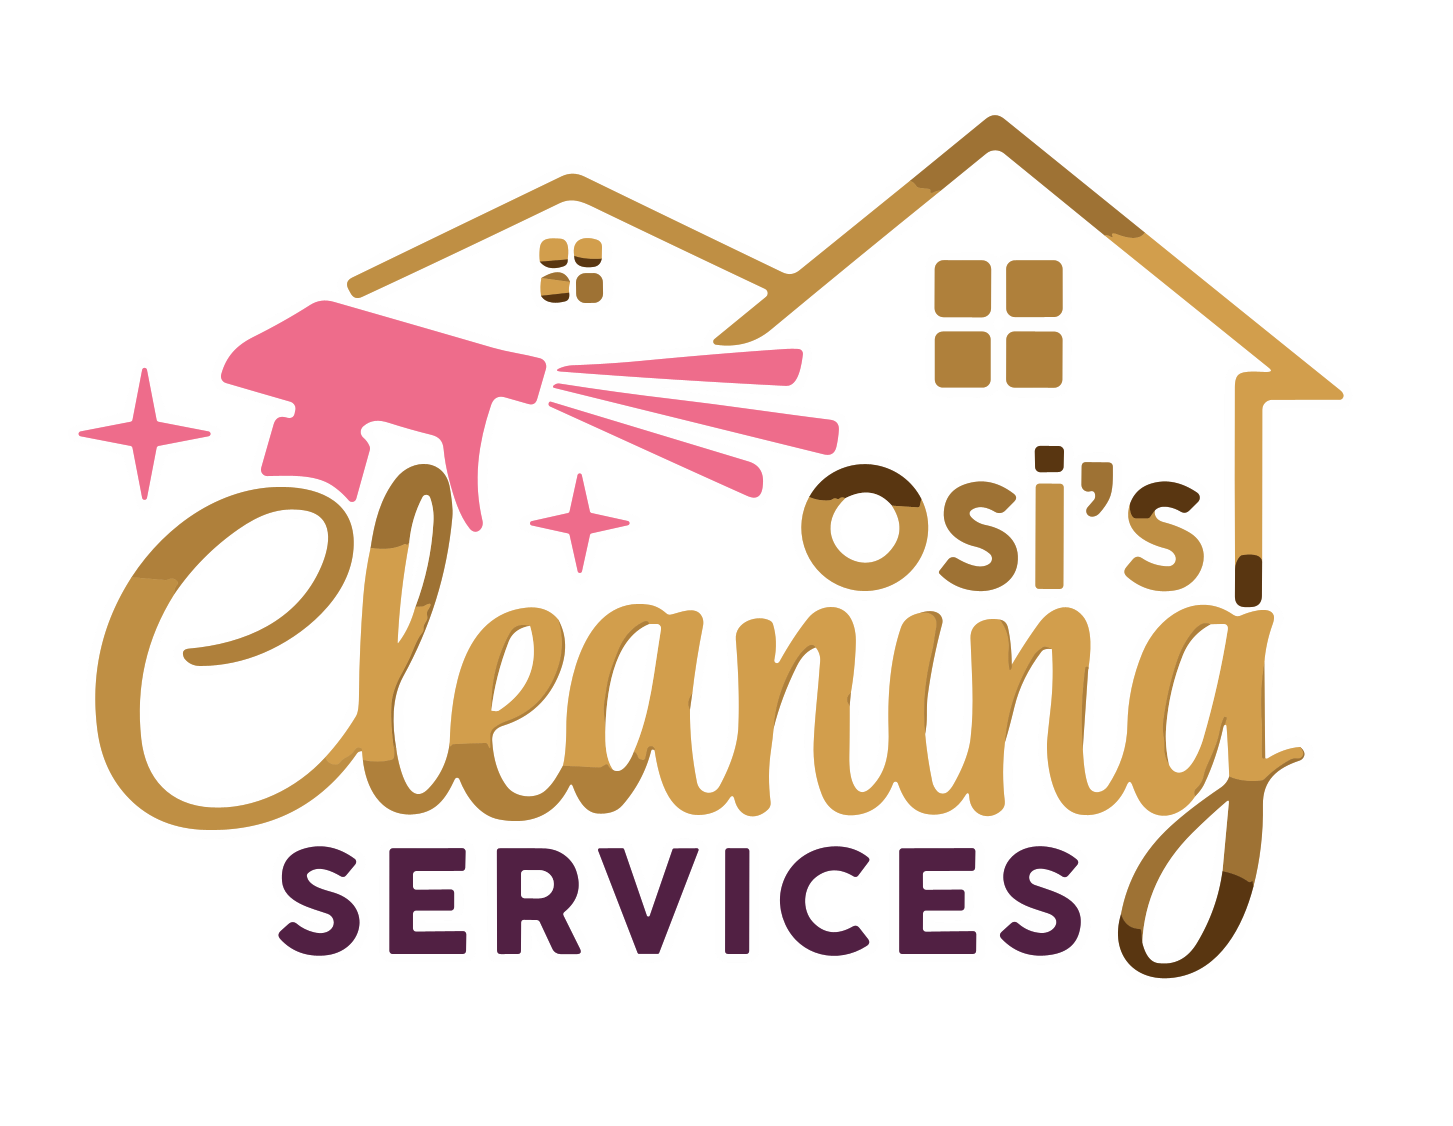 Osi's cleaning services offers services of Residential Cleaning, Residential Cleaning, Deep Cleaning, Move Out - In, Airbnb Cleaning, Post Construction Cleaning, Commercial Cleaning, Office Cleaning in Mercer, Middlesex, Burlington, Somerset, Bucks en Pennsylvania - Residential Cleaning